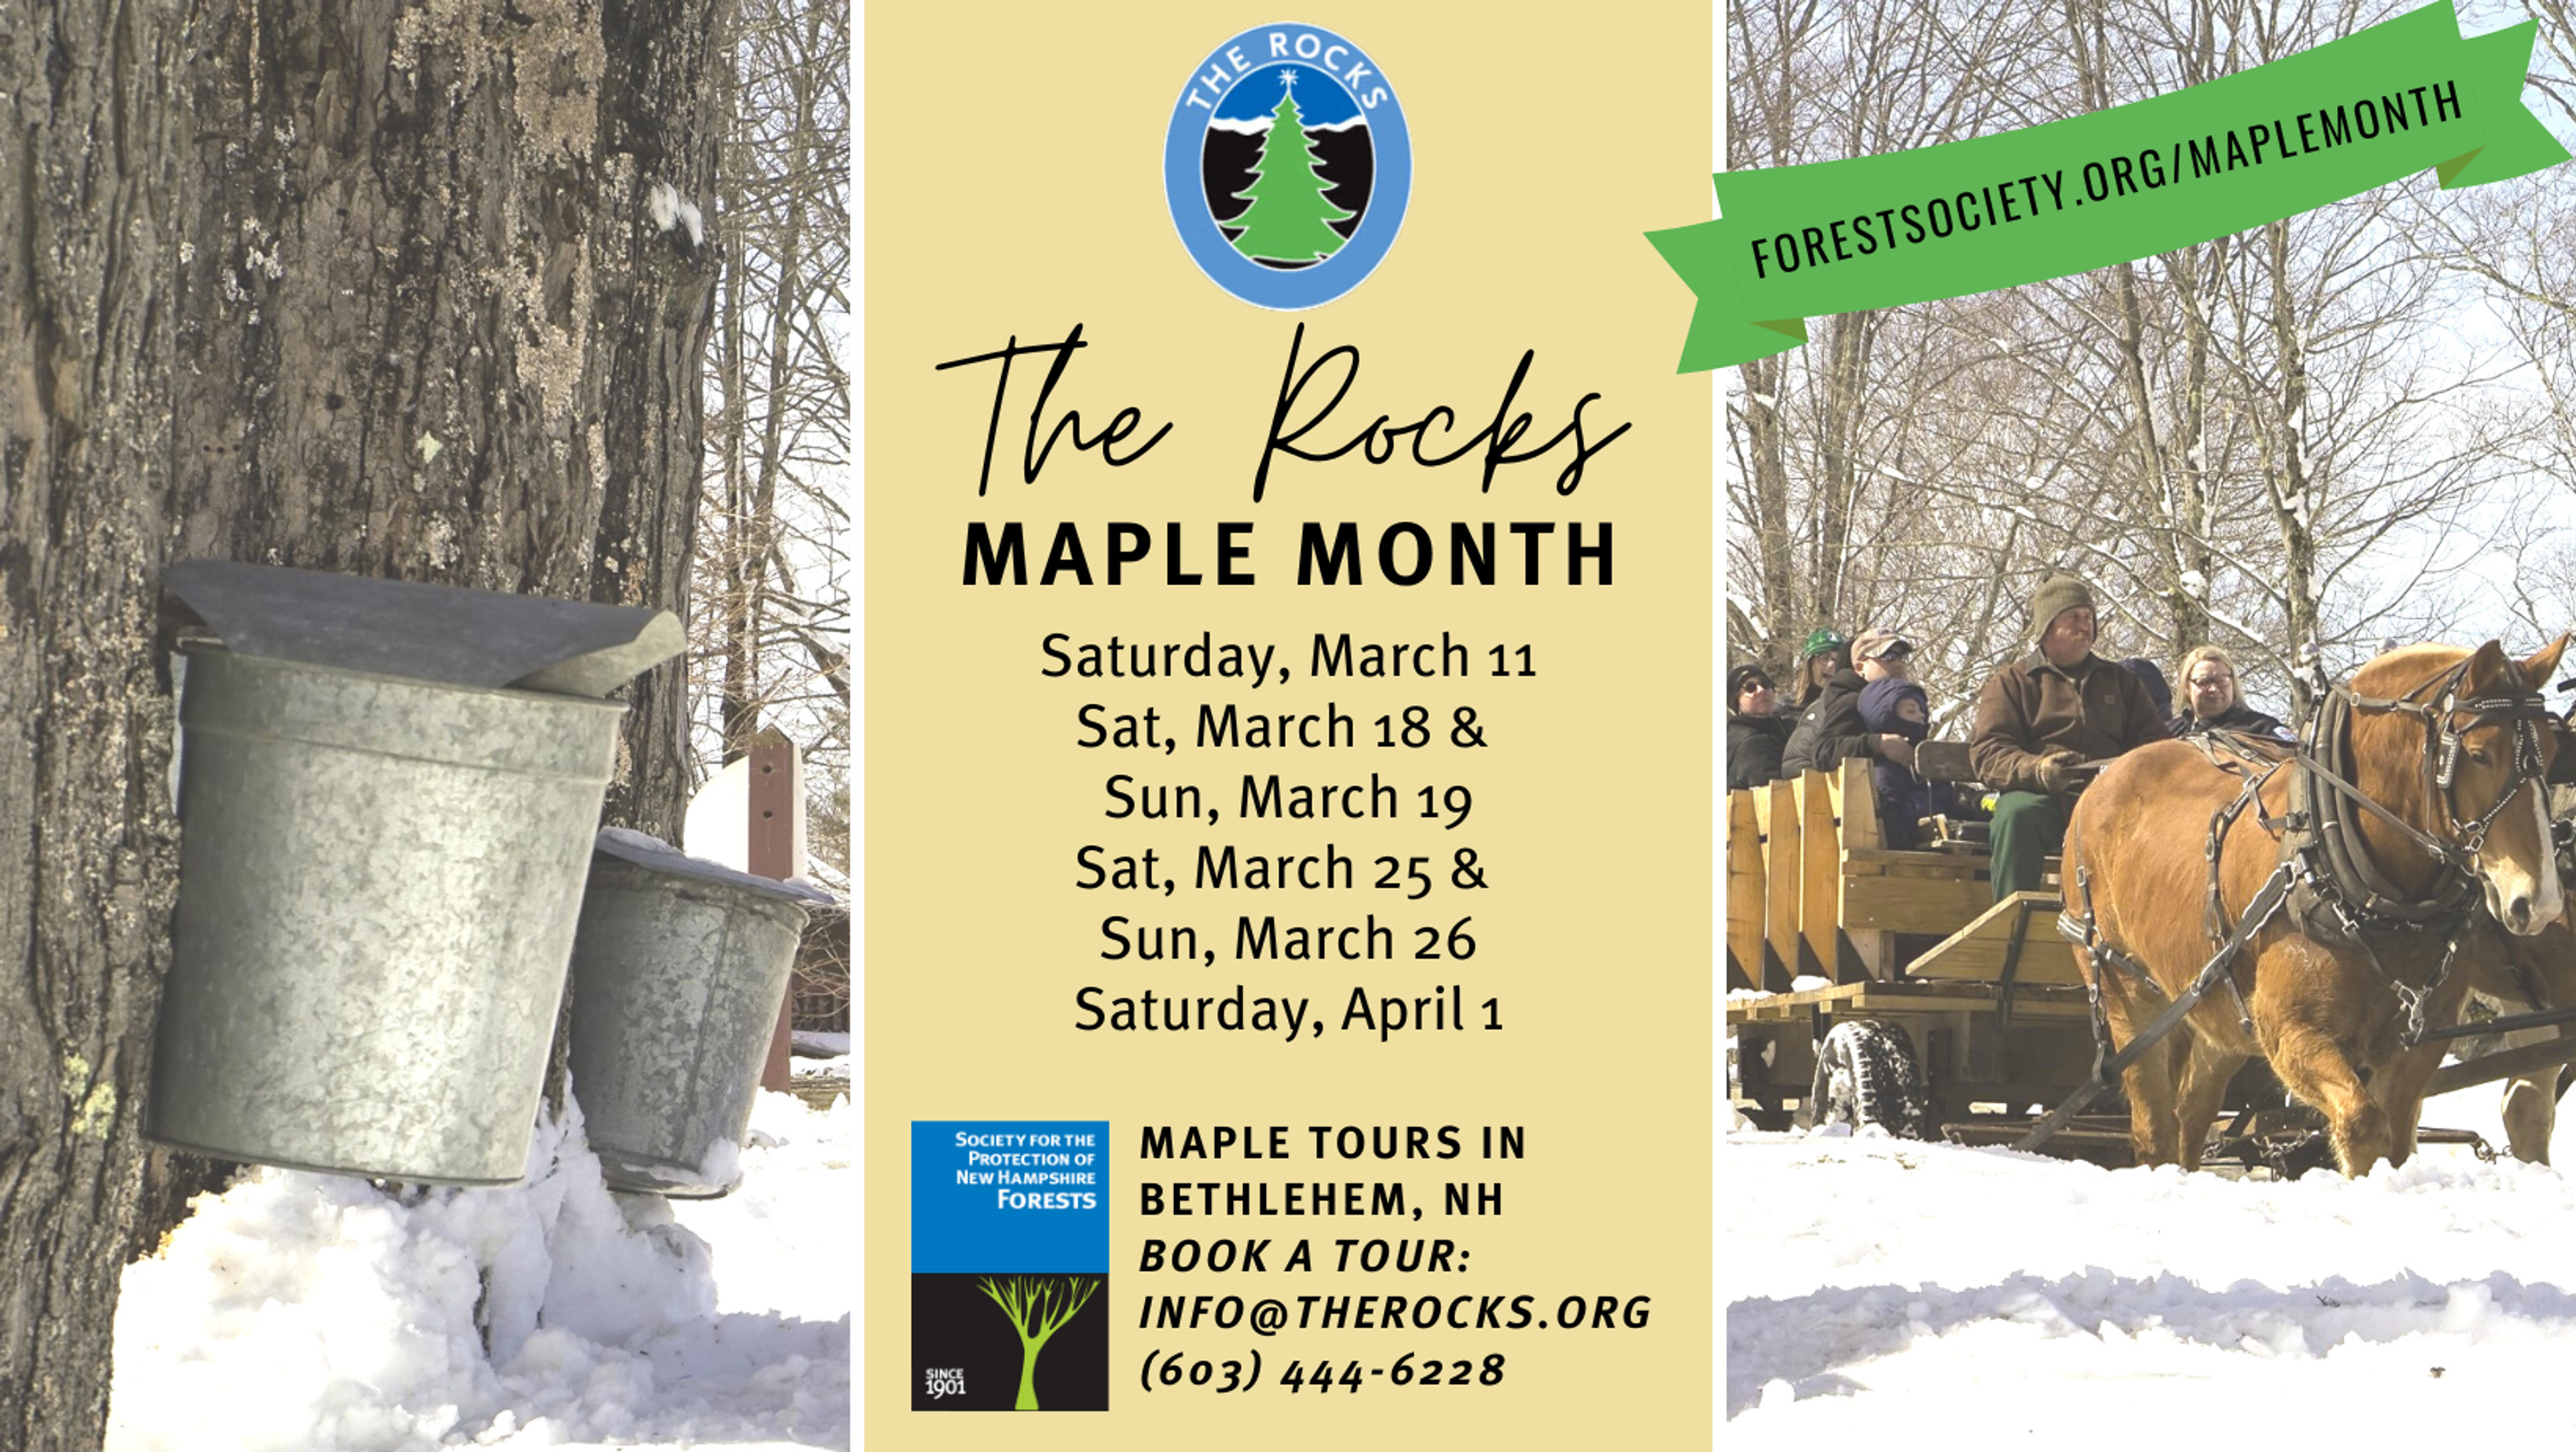 A horse drawn wagon near maple trees with sap buckets with information about Maple Month at The Rocks.